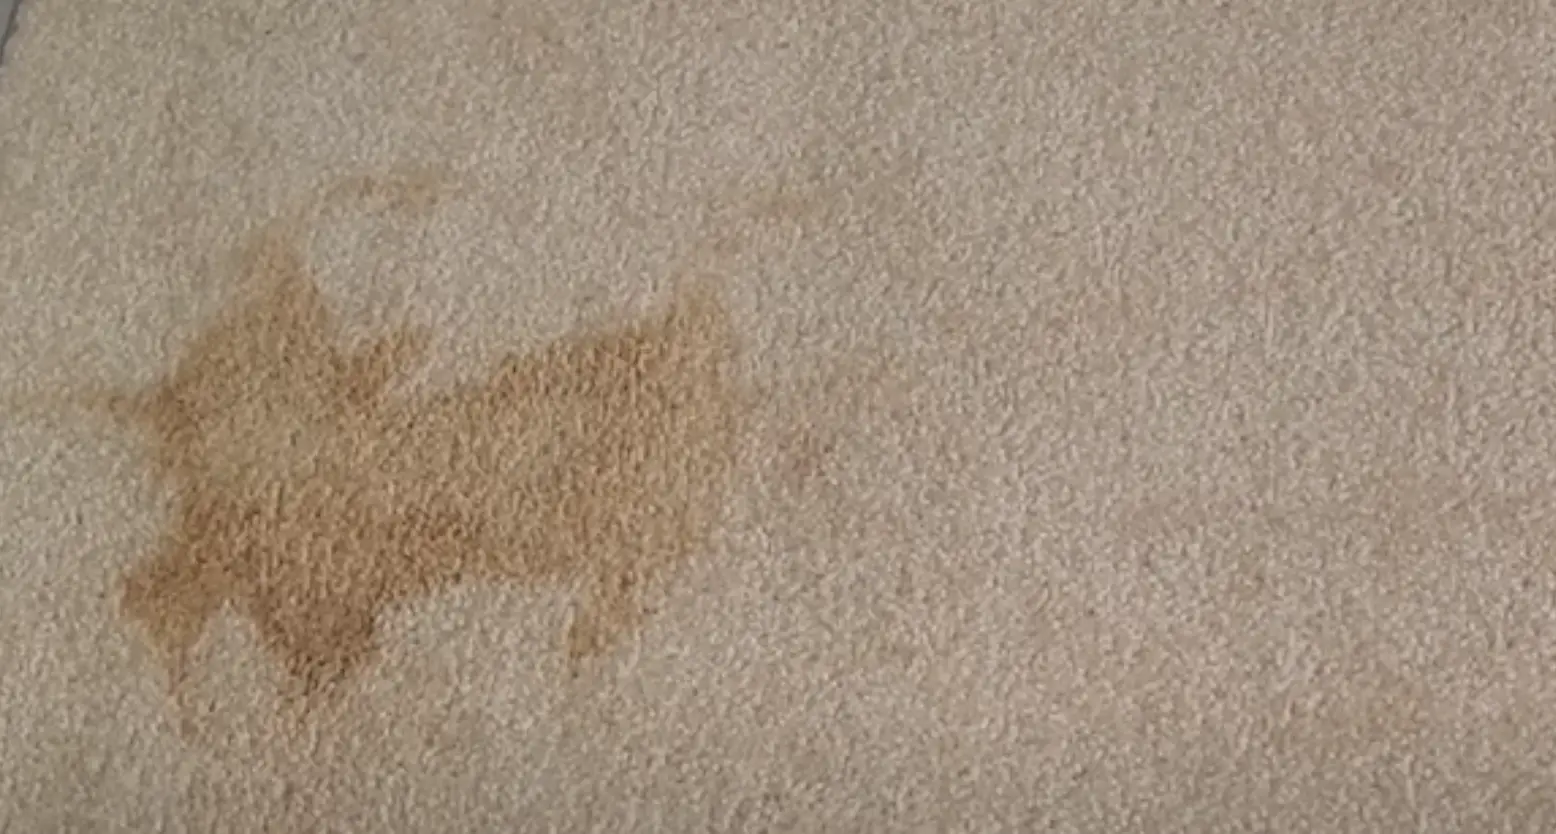 How To Remove Coffee Stain On Carpet